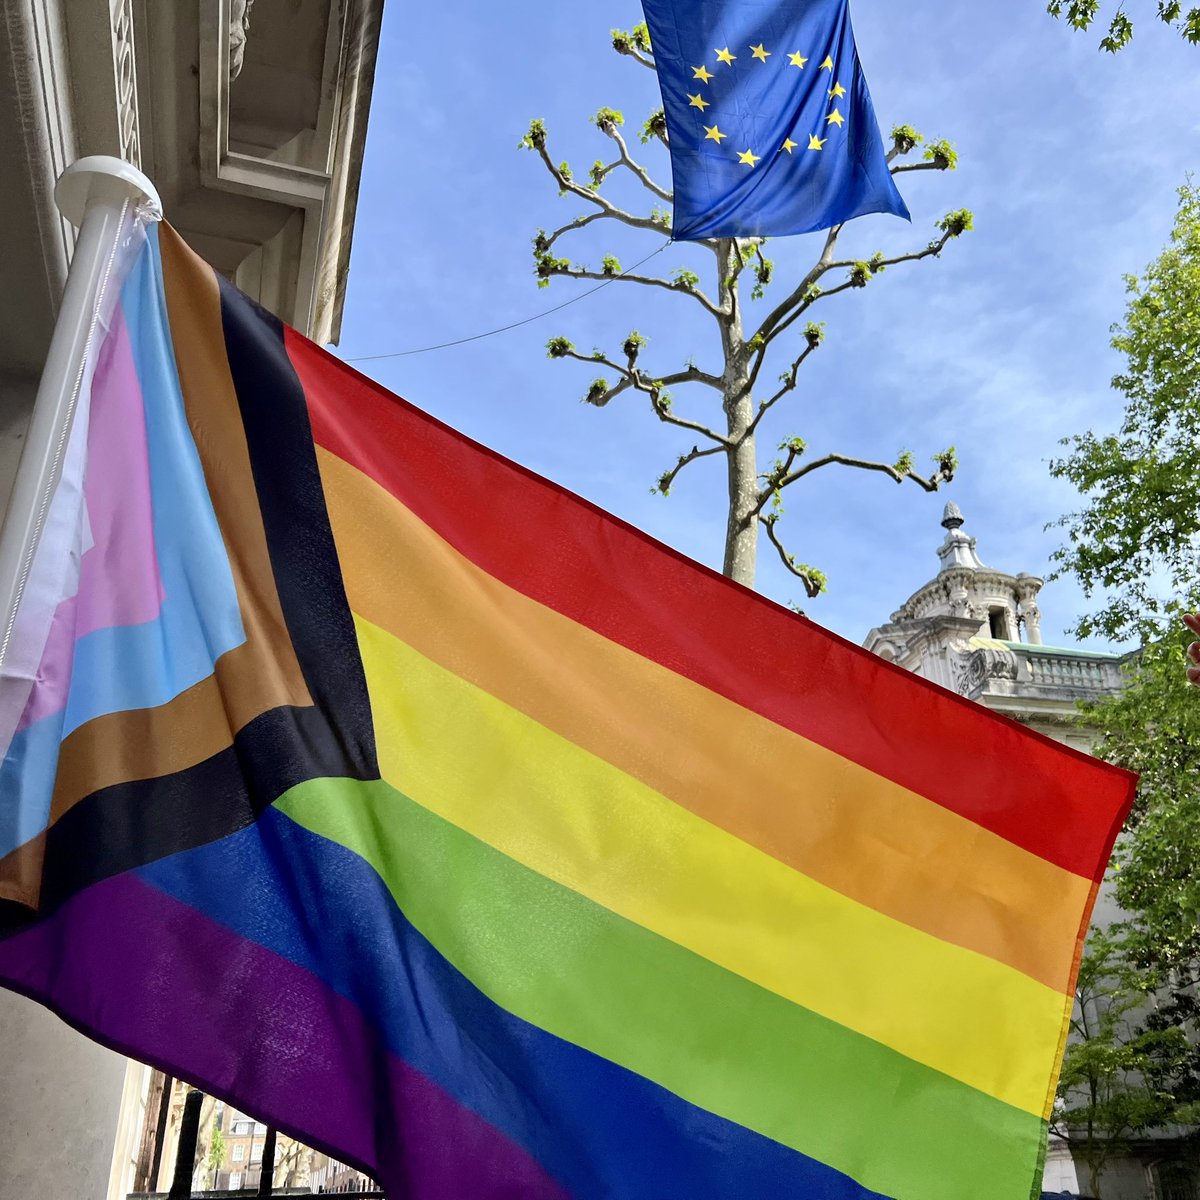 Homophobia, biphobia & transphobia have no place in the 🇪🇺 or anywhere in the 🌍 The EU will keep working to build, not just imagine, a world where equality thrives & every person can live free & equal. 📍Statement of @JosepBorrellF on behalf of the EU on #IDAHOBIT 🏳️‍🌈